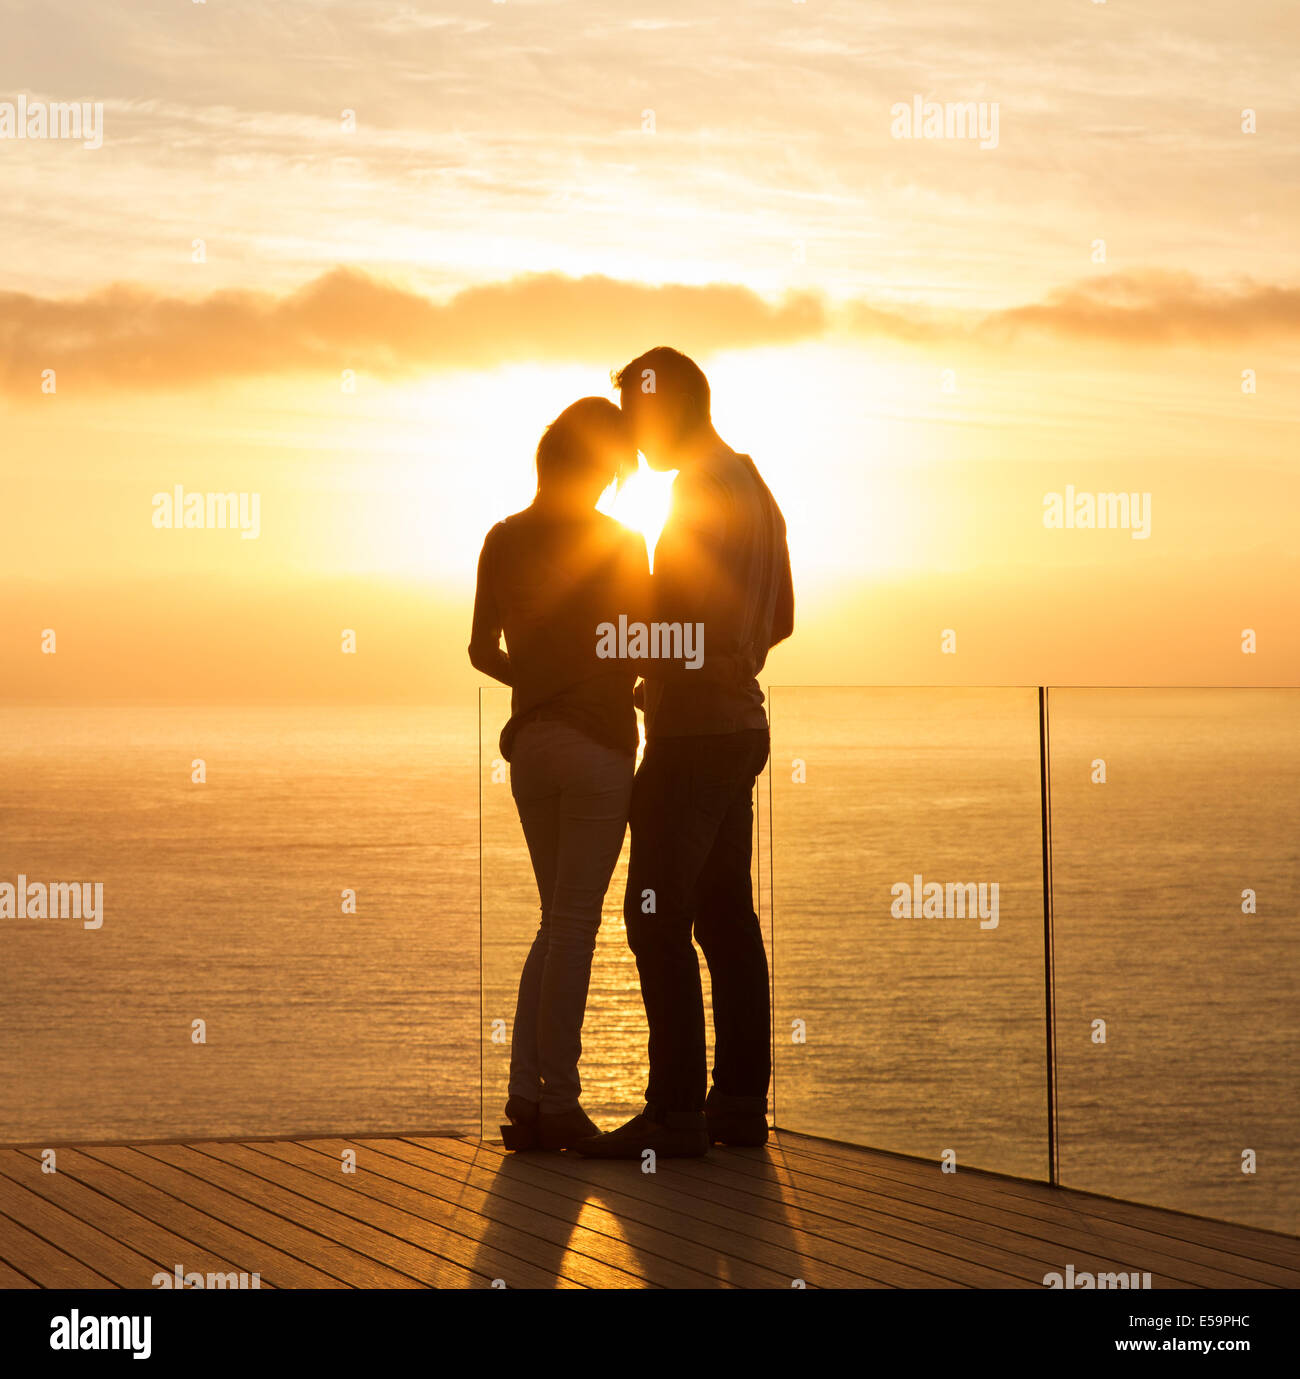 Silhouette of couple at sunset over ocean Stock Photo